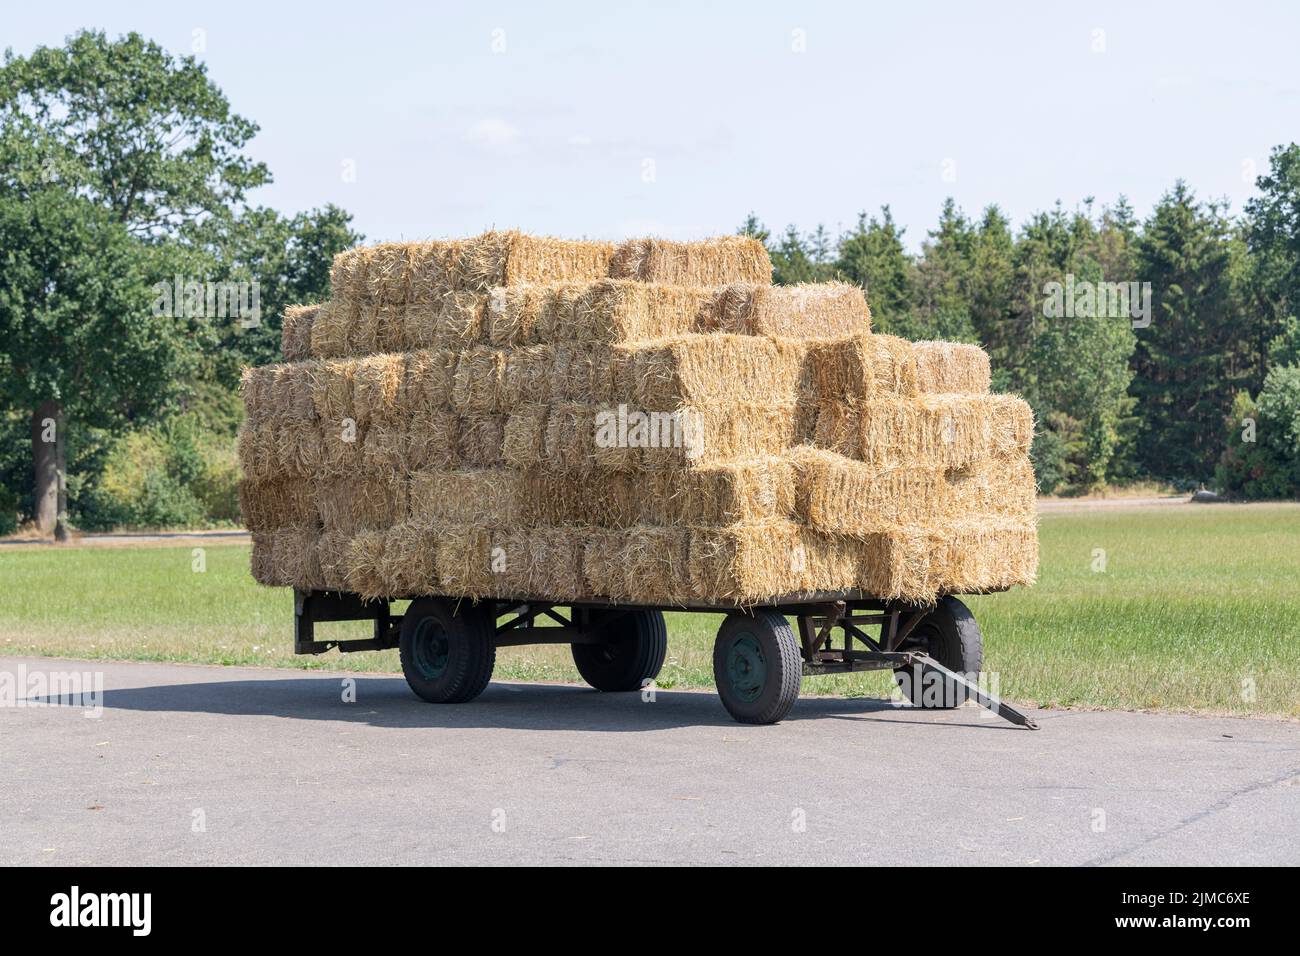 Plain old farm wagon with straw bales stacked Stock Photo